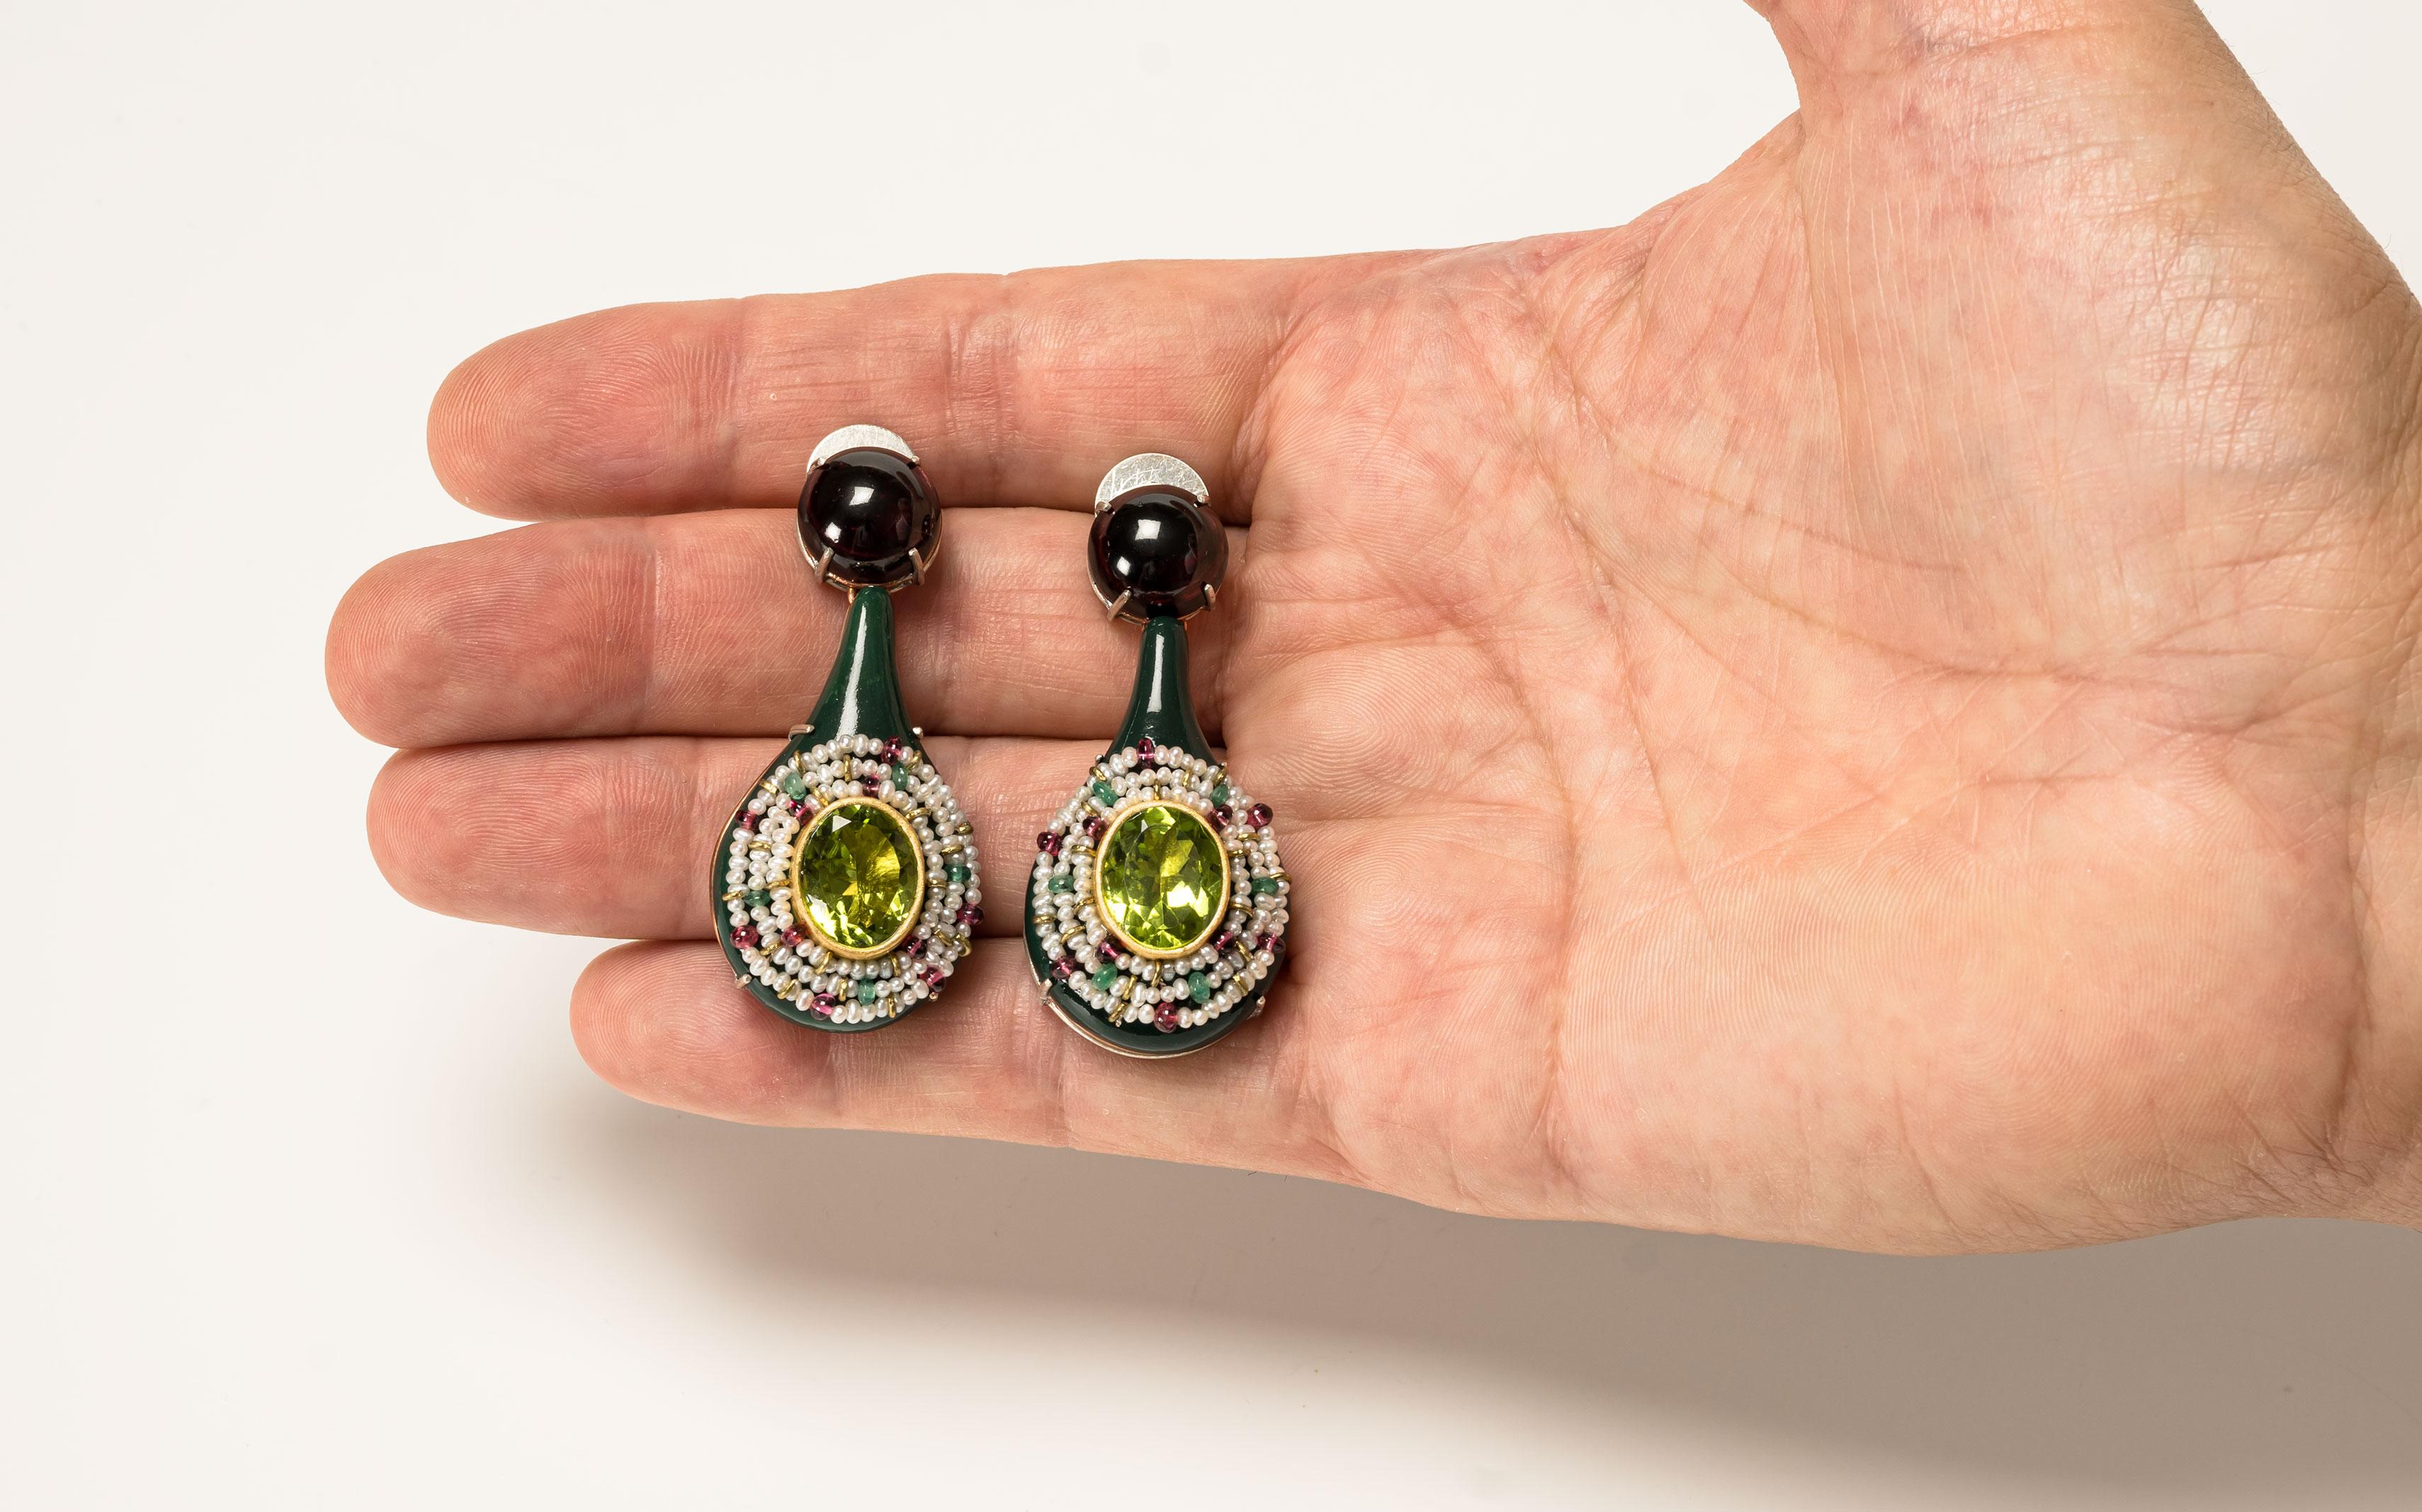 Stud Earrings “Nima”, 2023, are a one-of-a-kind contemporary author jewelry by italian artist Gian Luca Bartellone.
Materials: papier-mâché, gold 18kt, silver, copper, peridots, garnets, rubellites, emeralds, pearls, gold leaf 22kt.

The main body